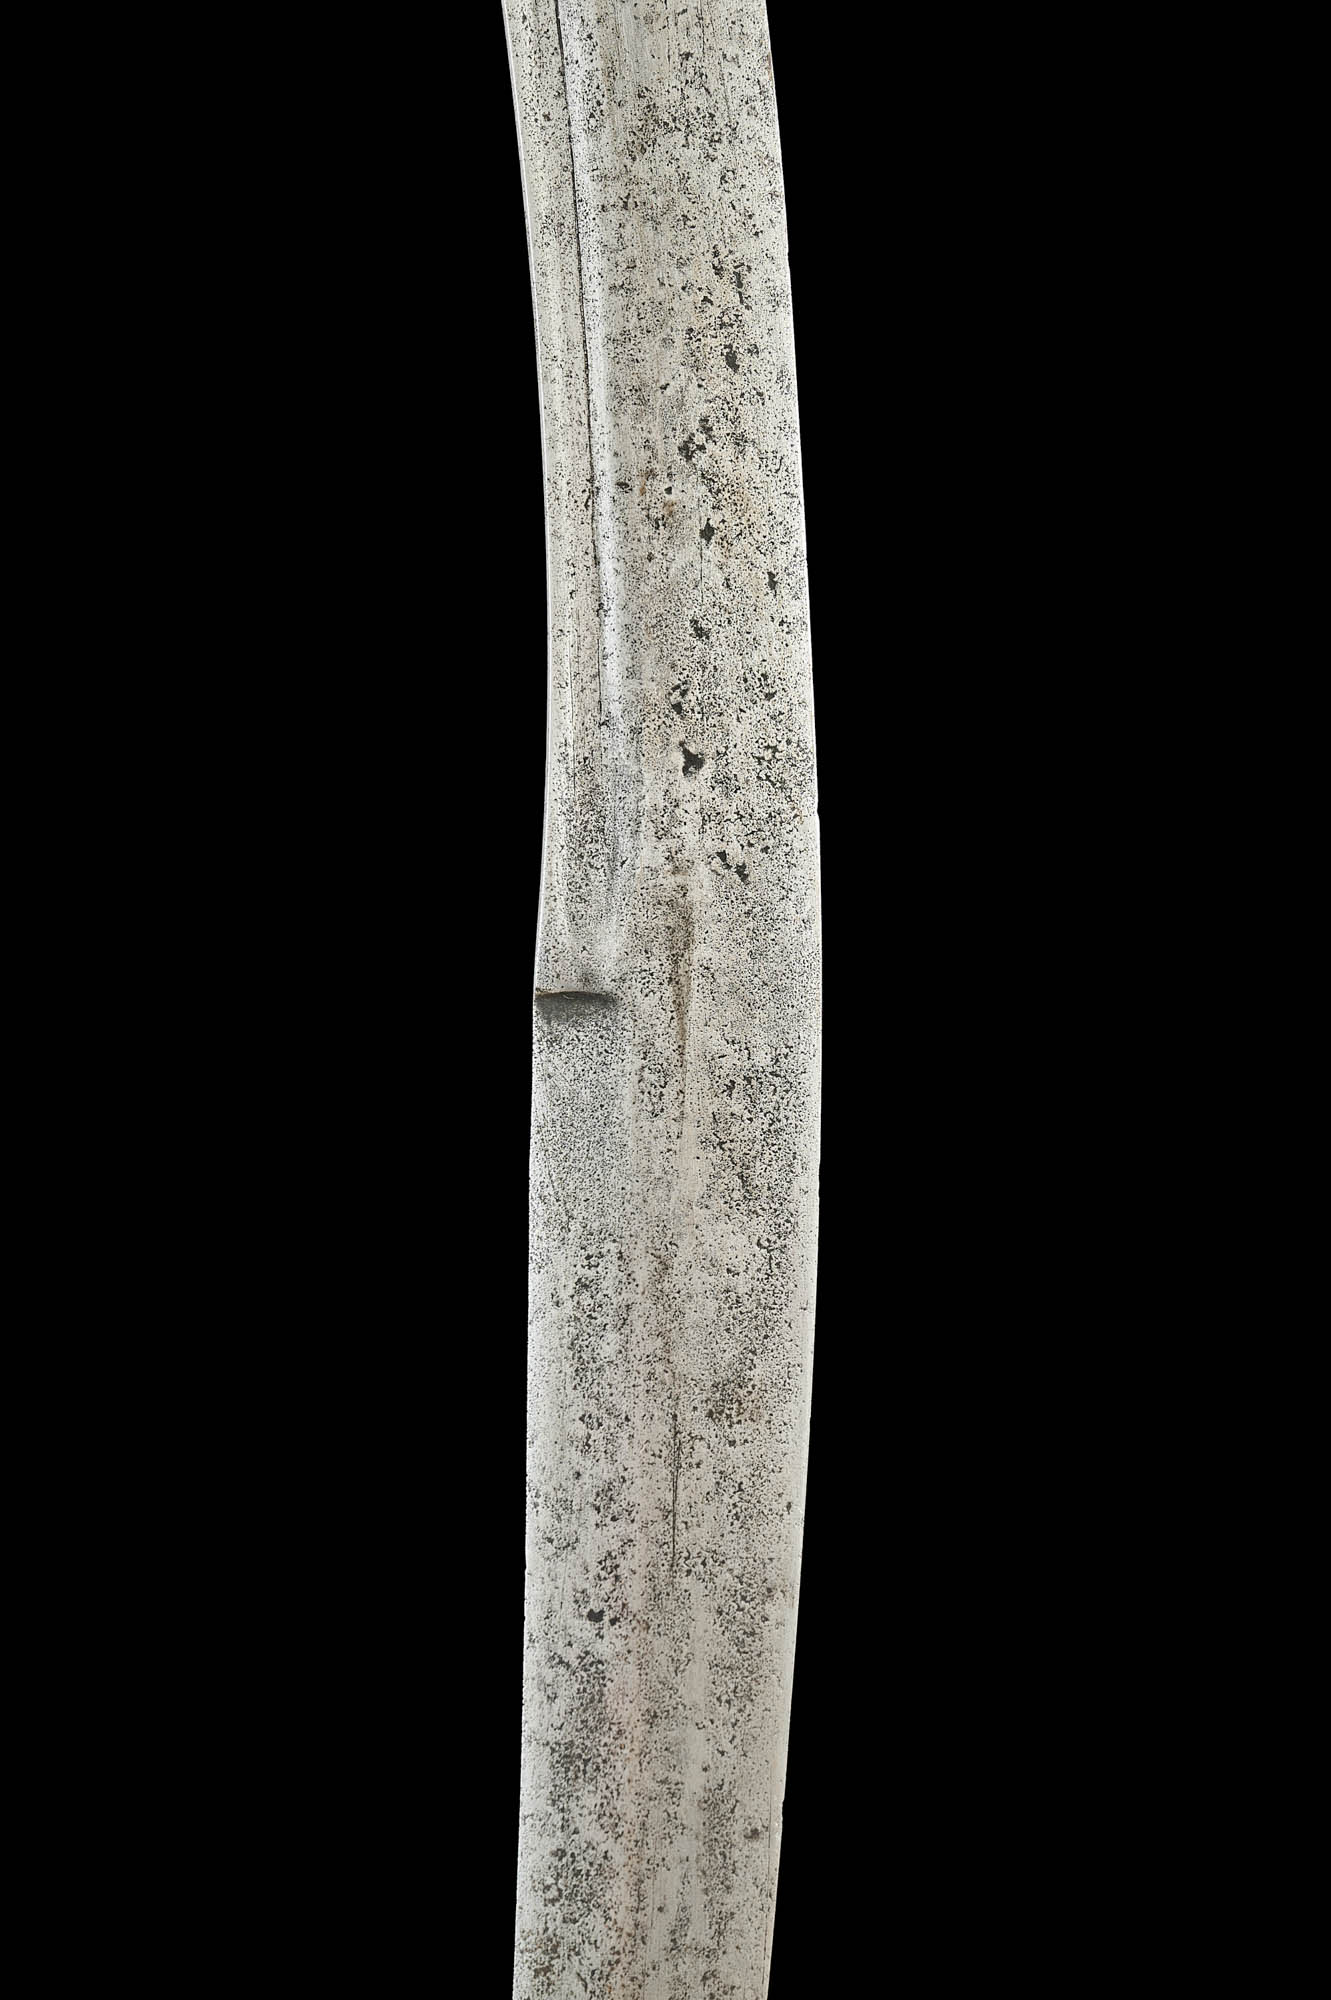 TATAR SABER SWORD DECORATED WITH RHOMBS - Image 17 of 21